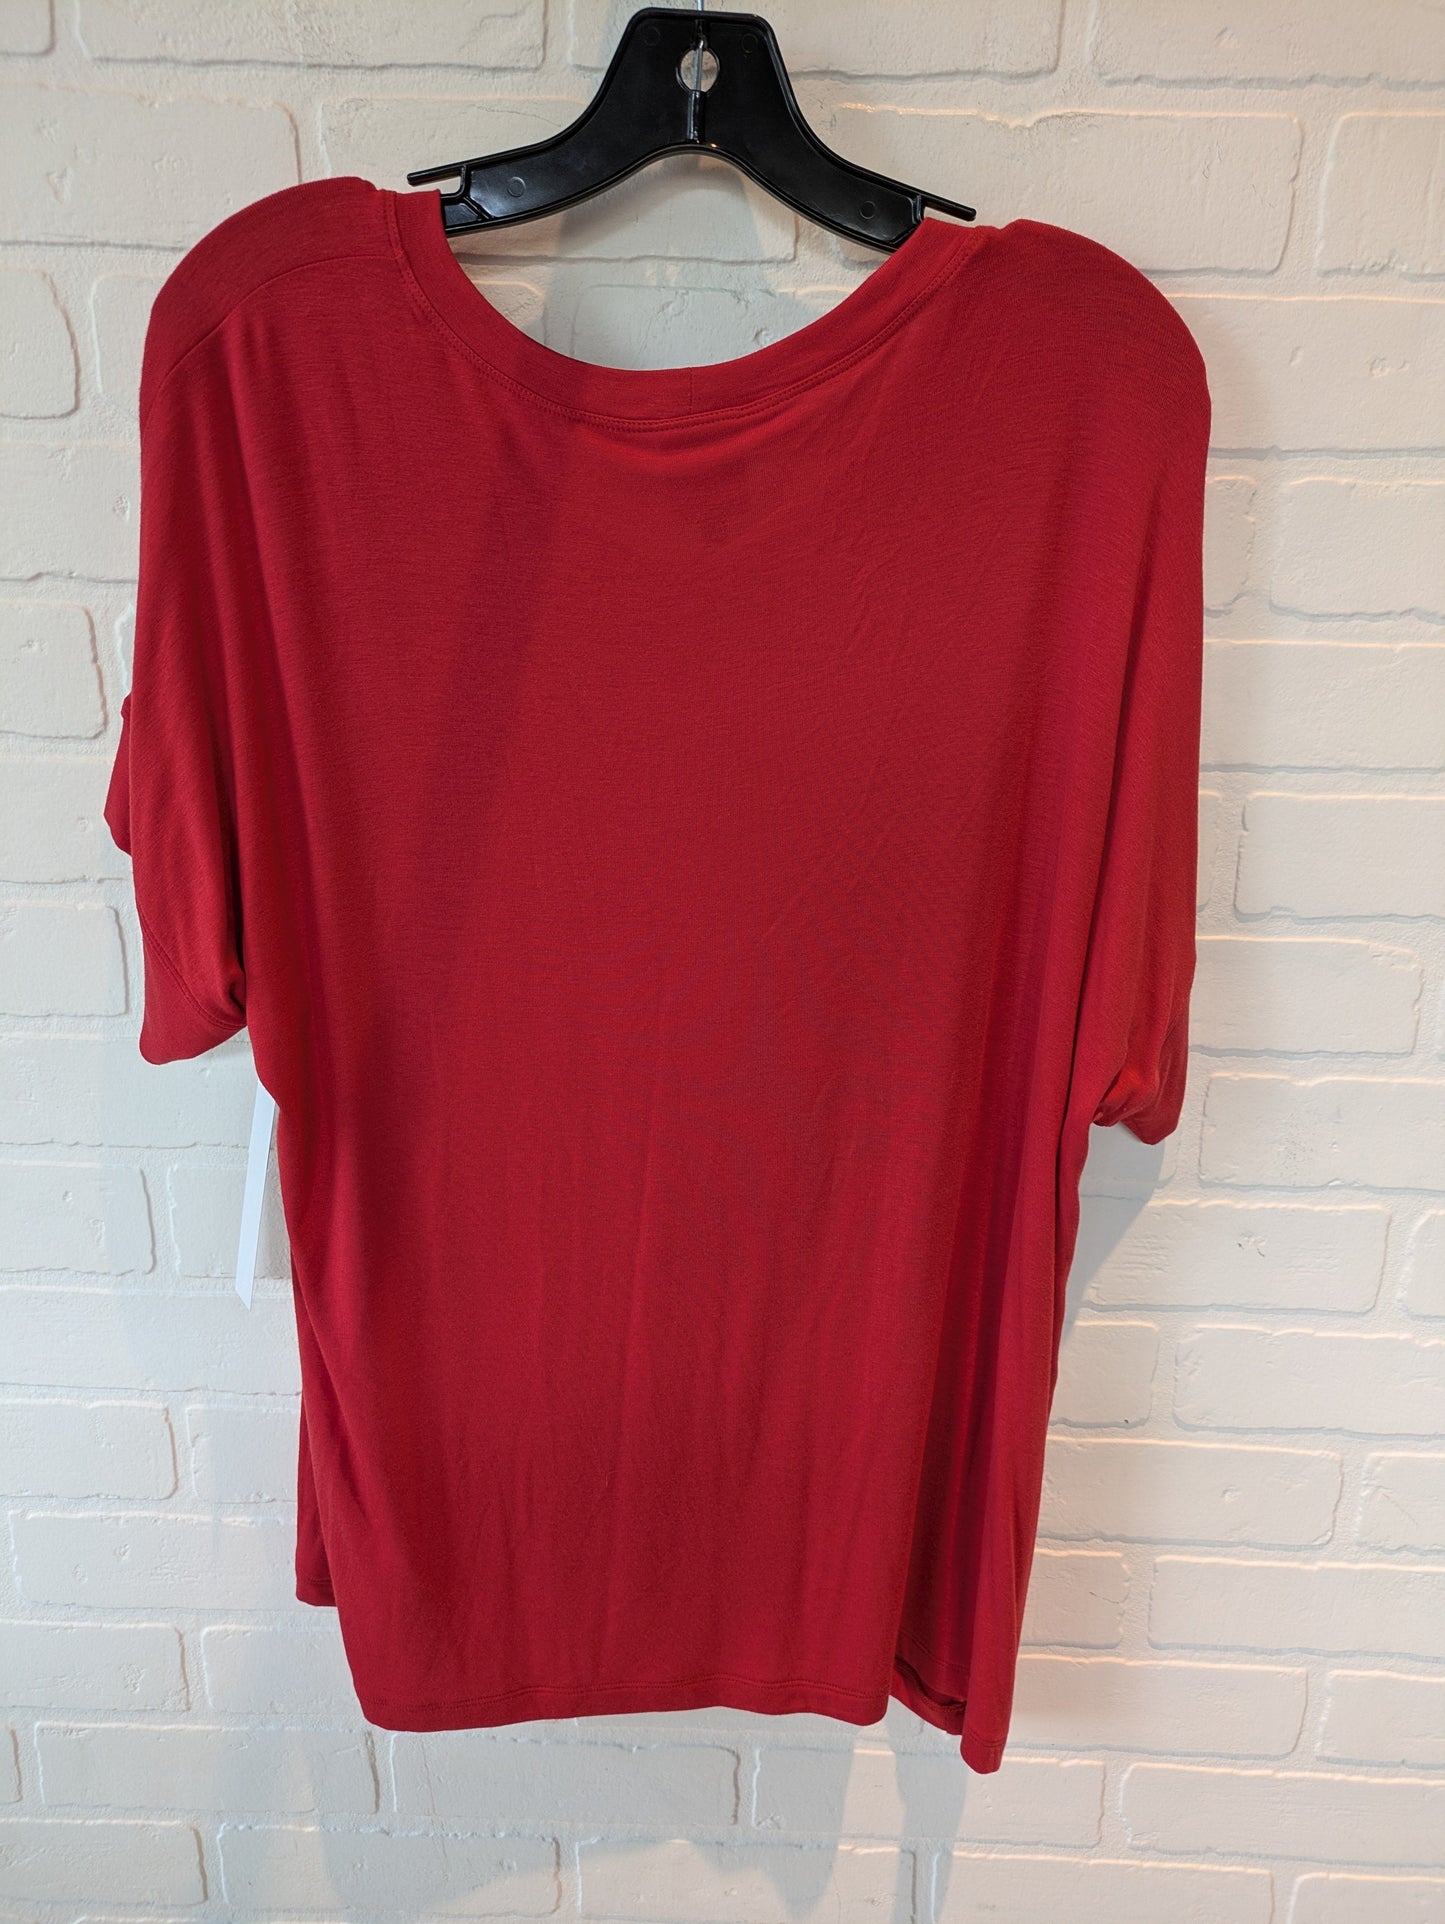 Red Top Short Sleeve Basic Cabi, Size S